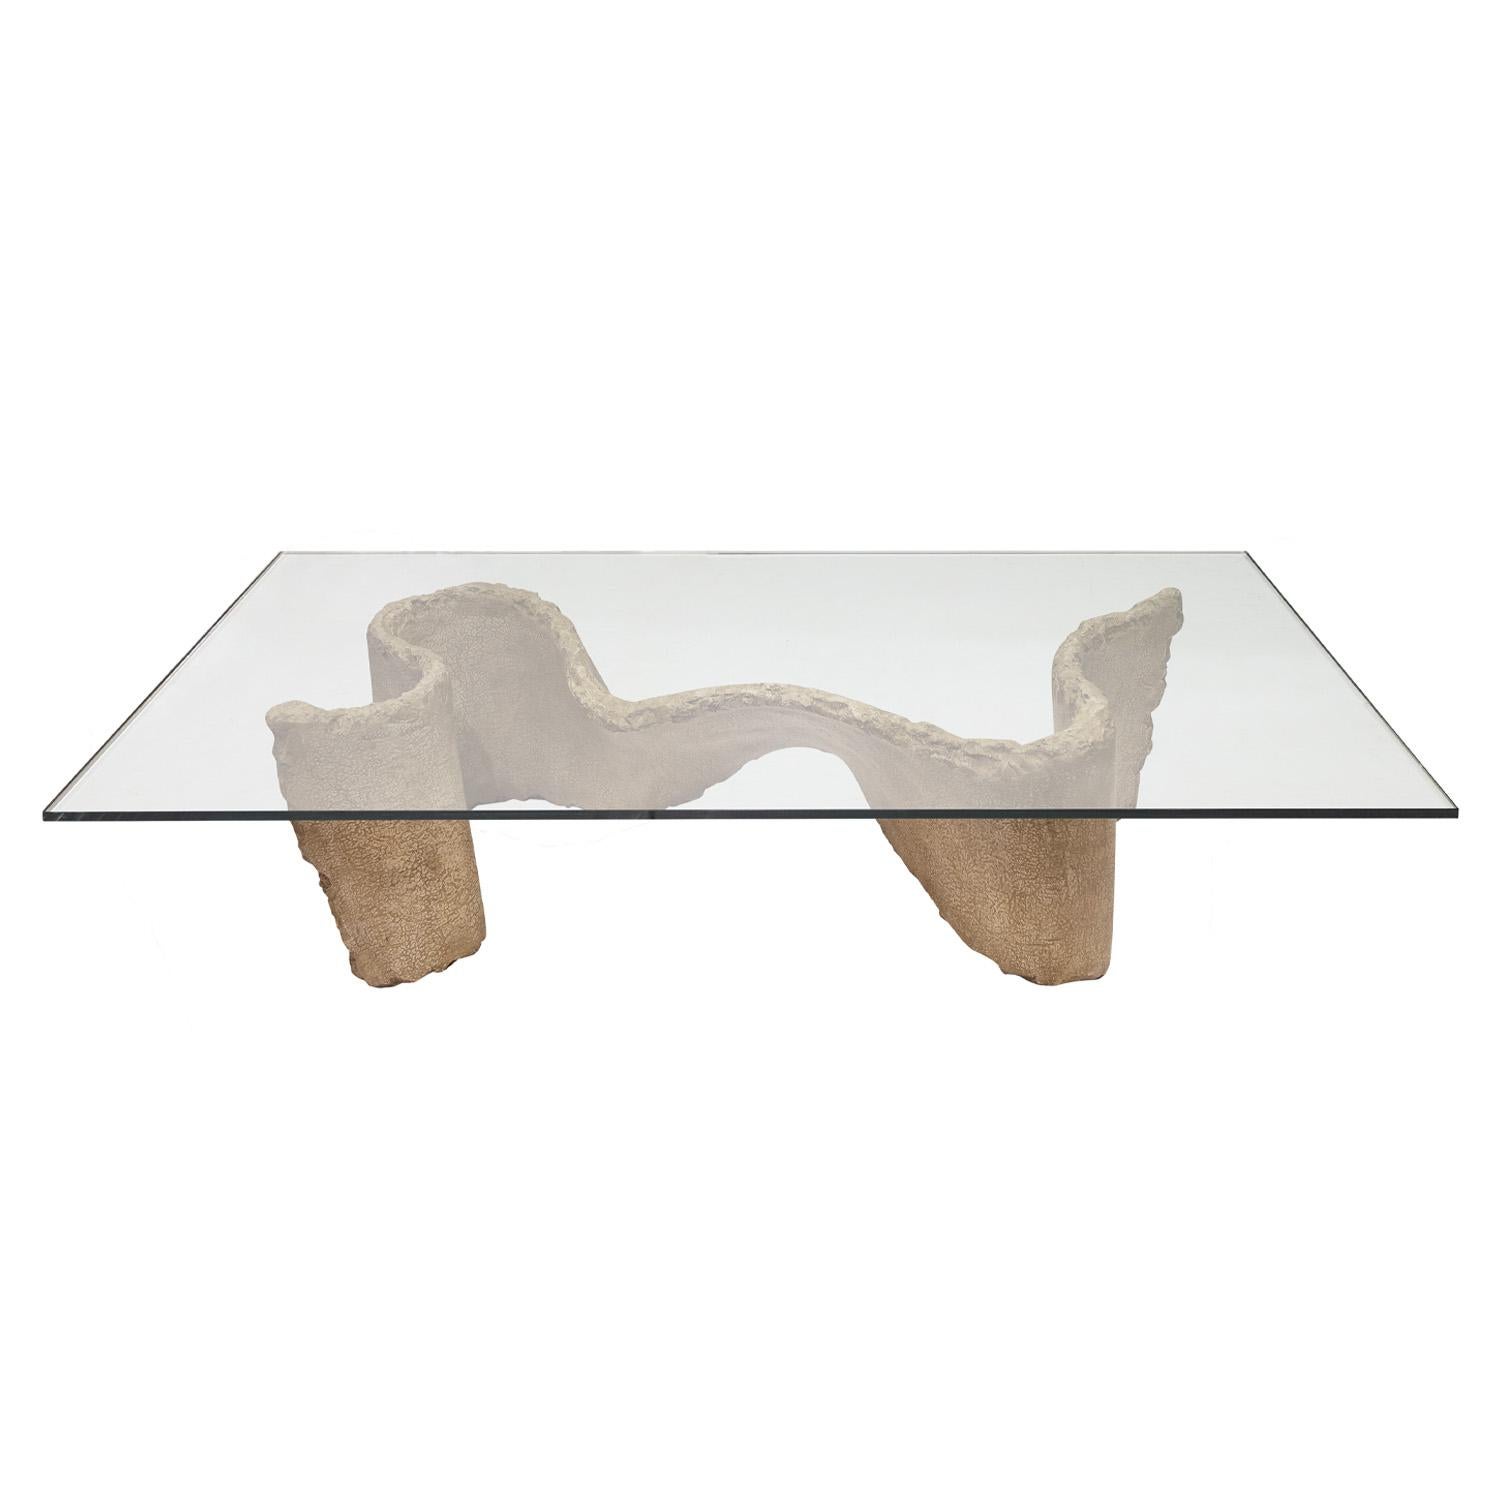 Coffee table with organic shape base in cast solid resin to resemble concrete with thick glass top by Silas Seandel, American 1970's (signed “Silas Seandel (C)” on base). This series in cast resin was made for a special collection shown at